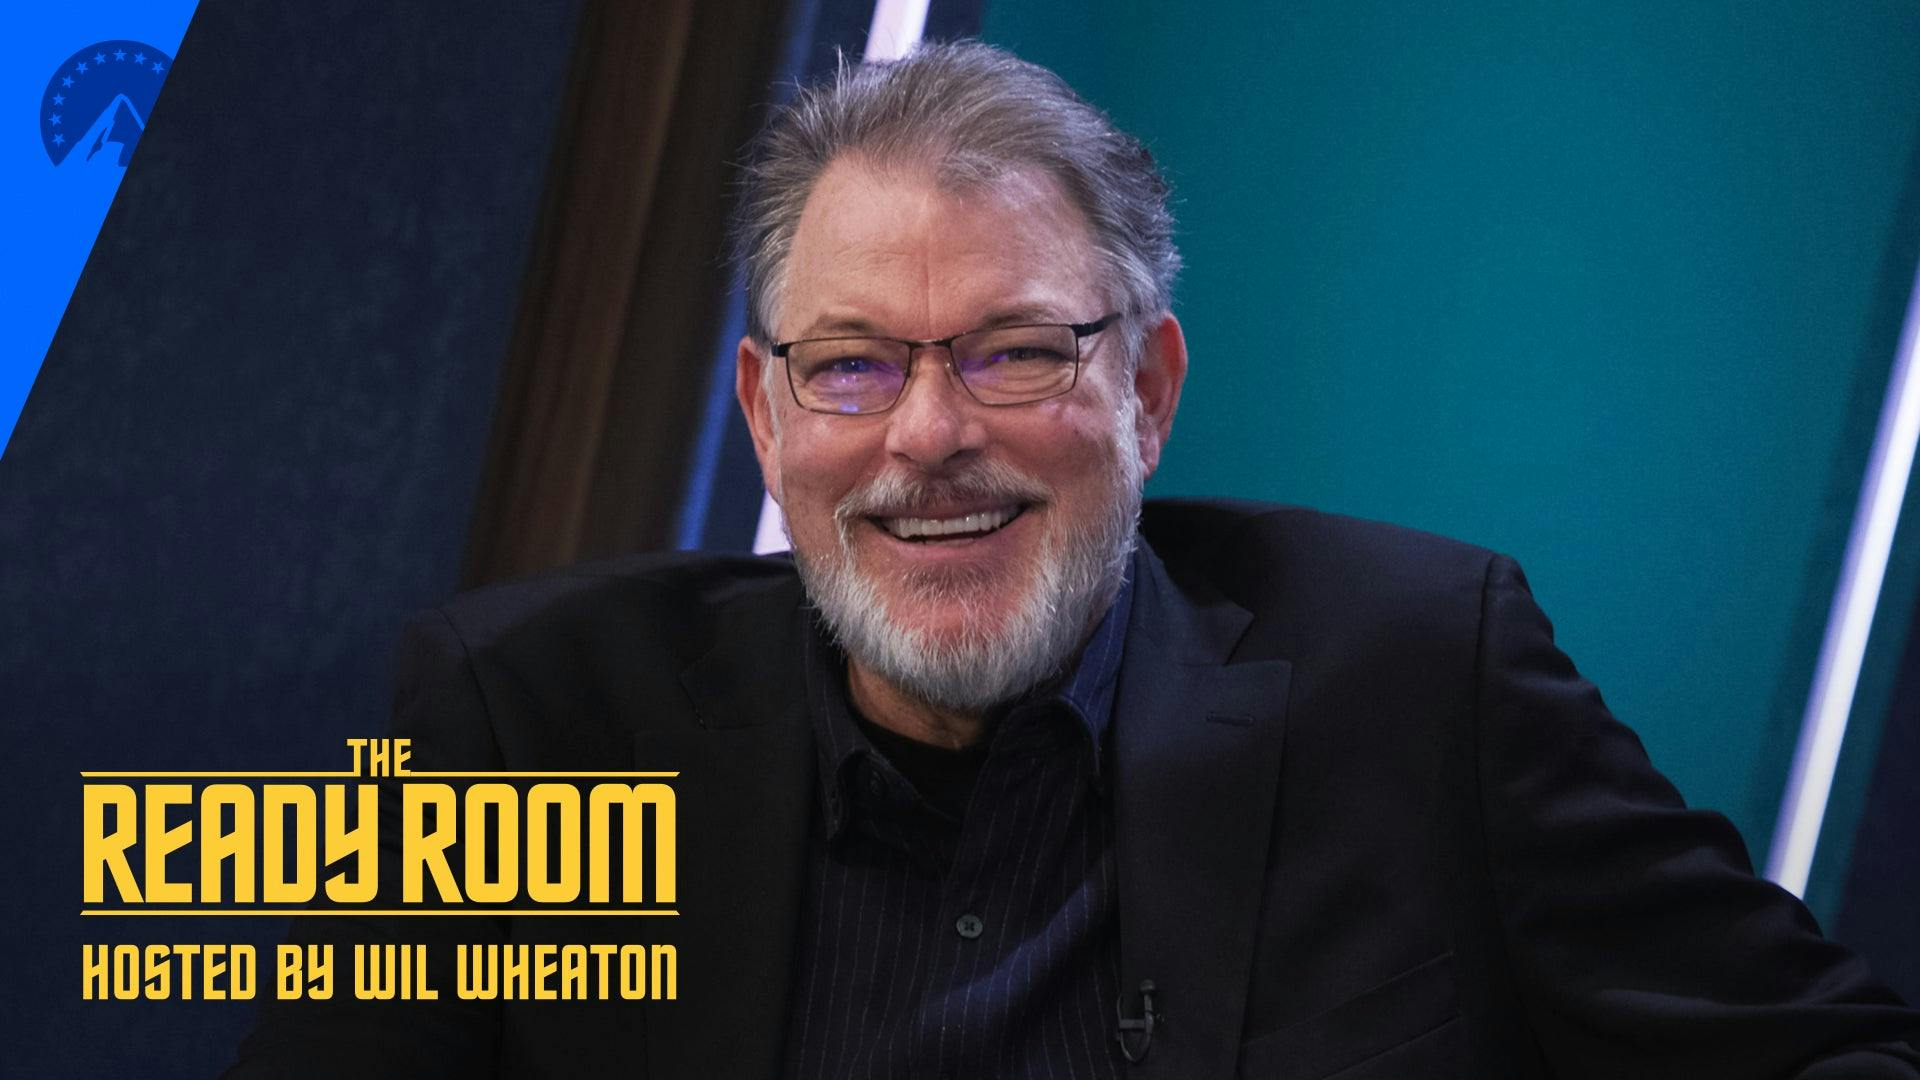 Star Trek: Picard's Jonathan Frakes Takes Command of The Ready Room